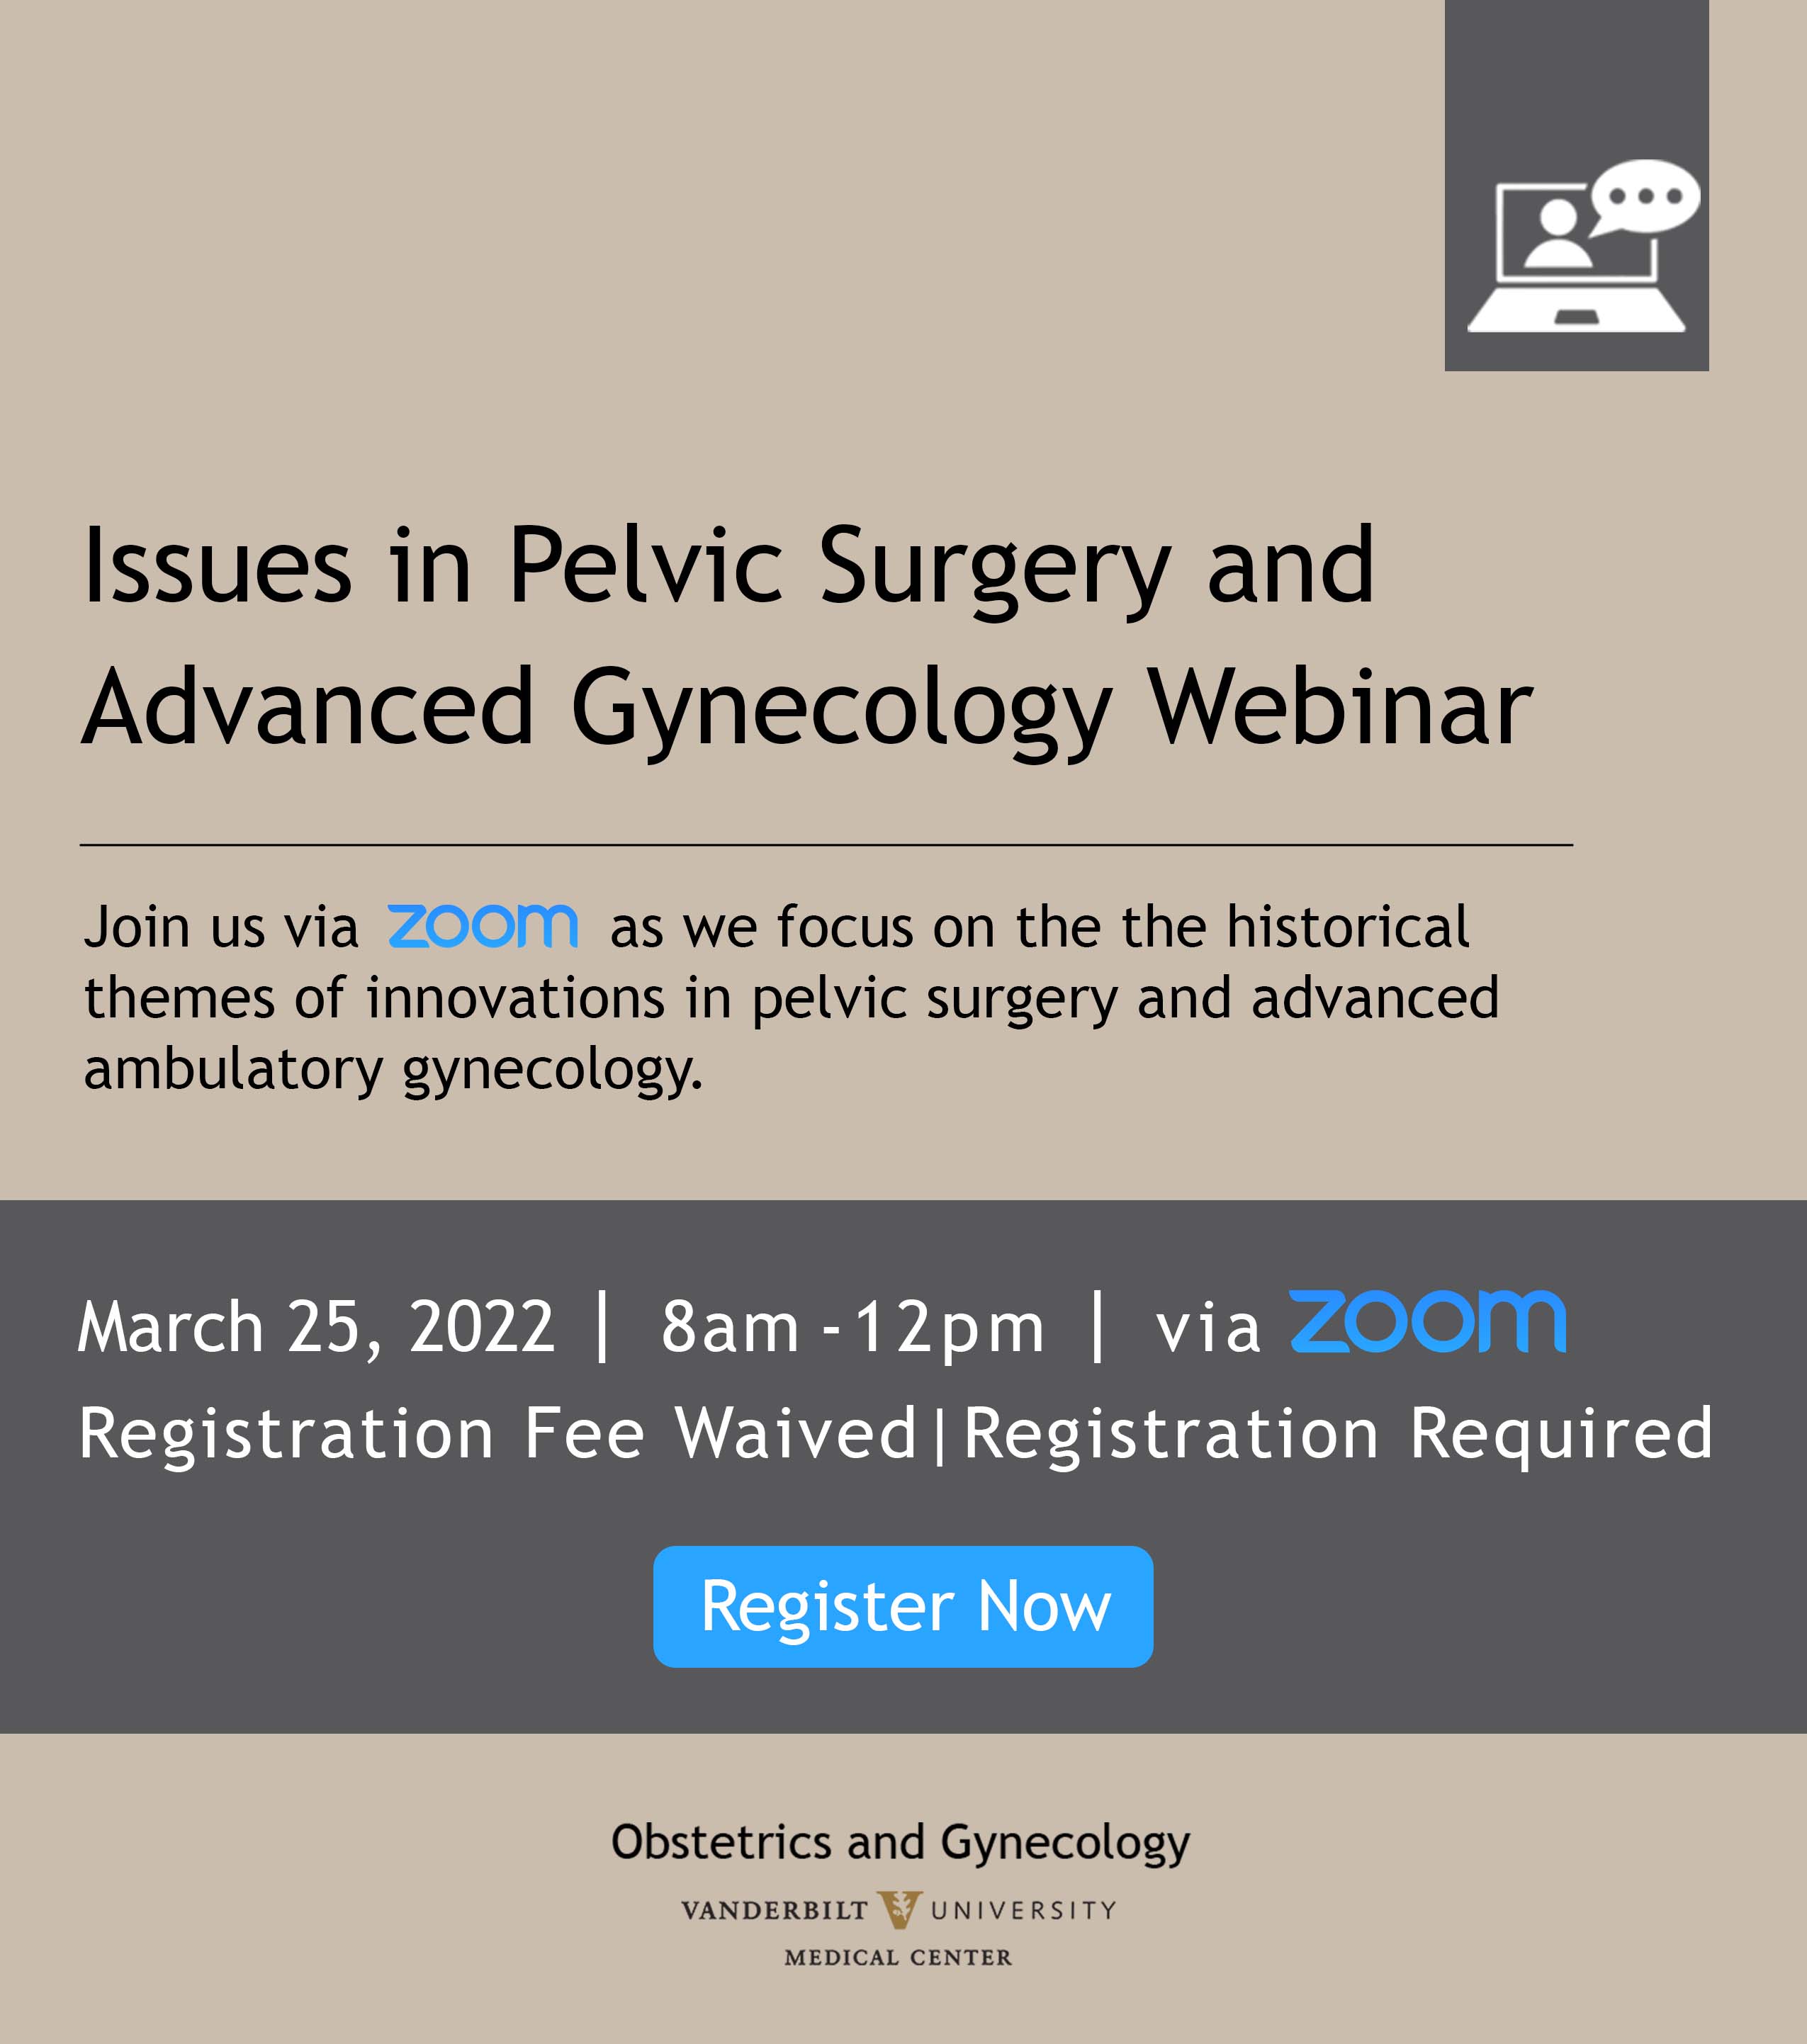 Issues in Pelvic Surgery and Advanced Gynecology Webinar